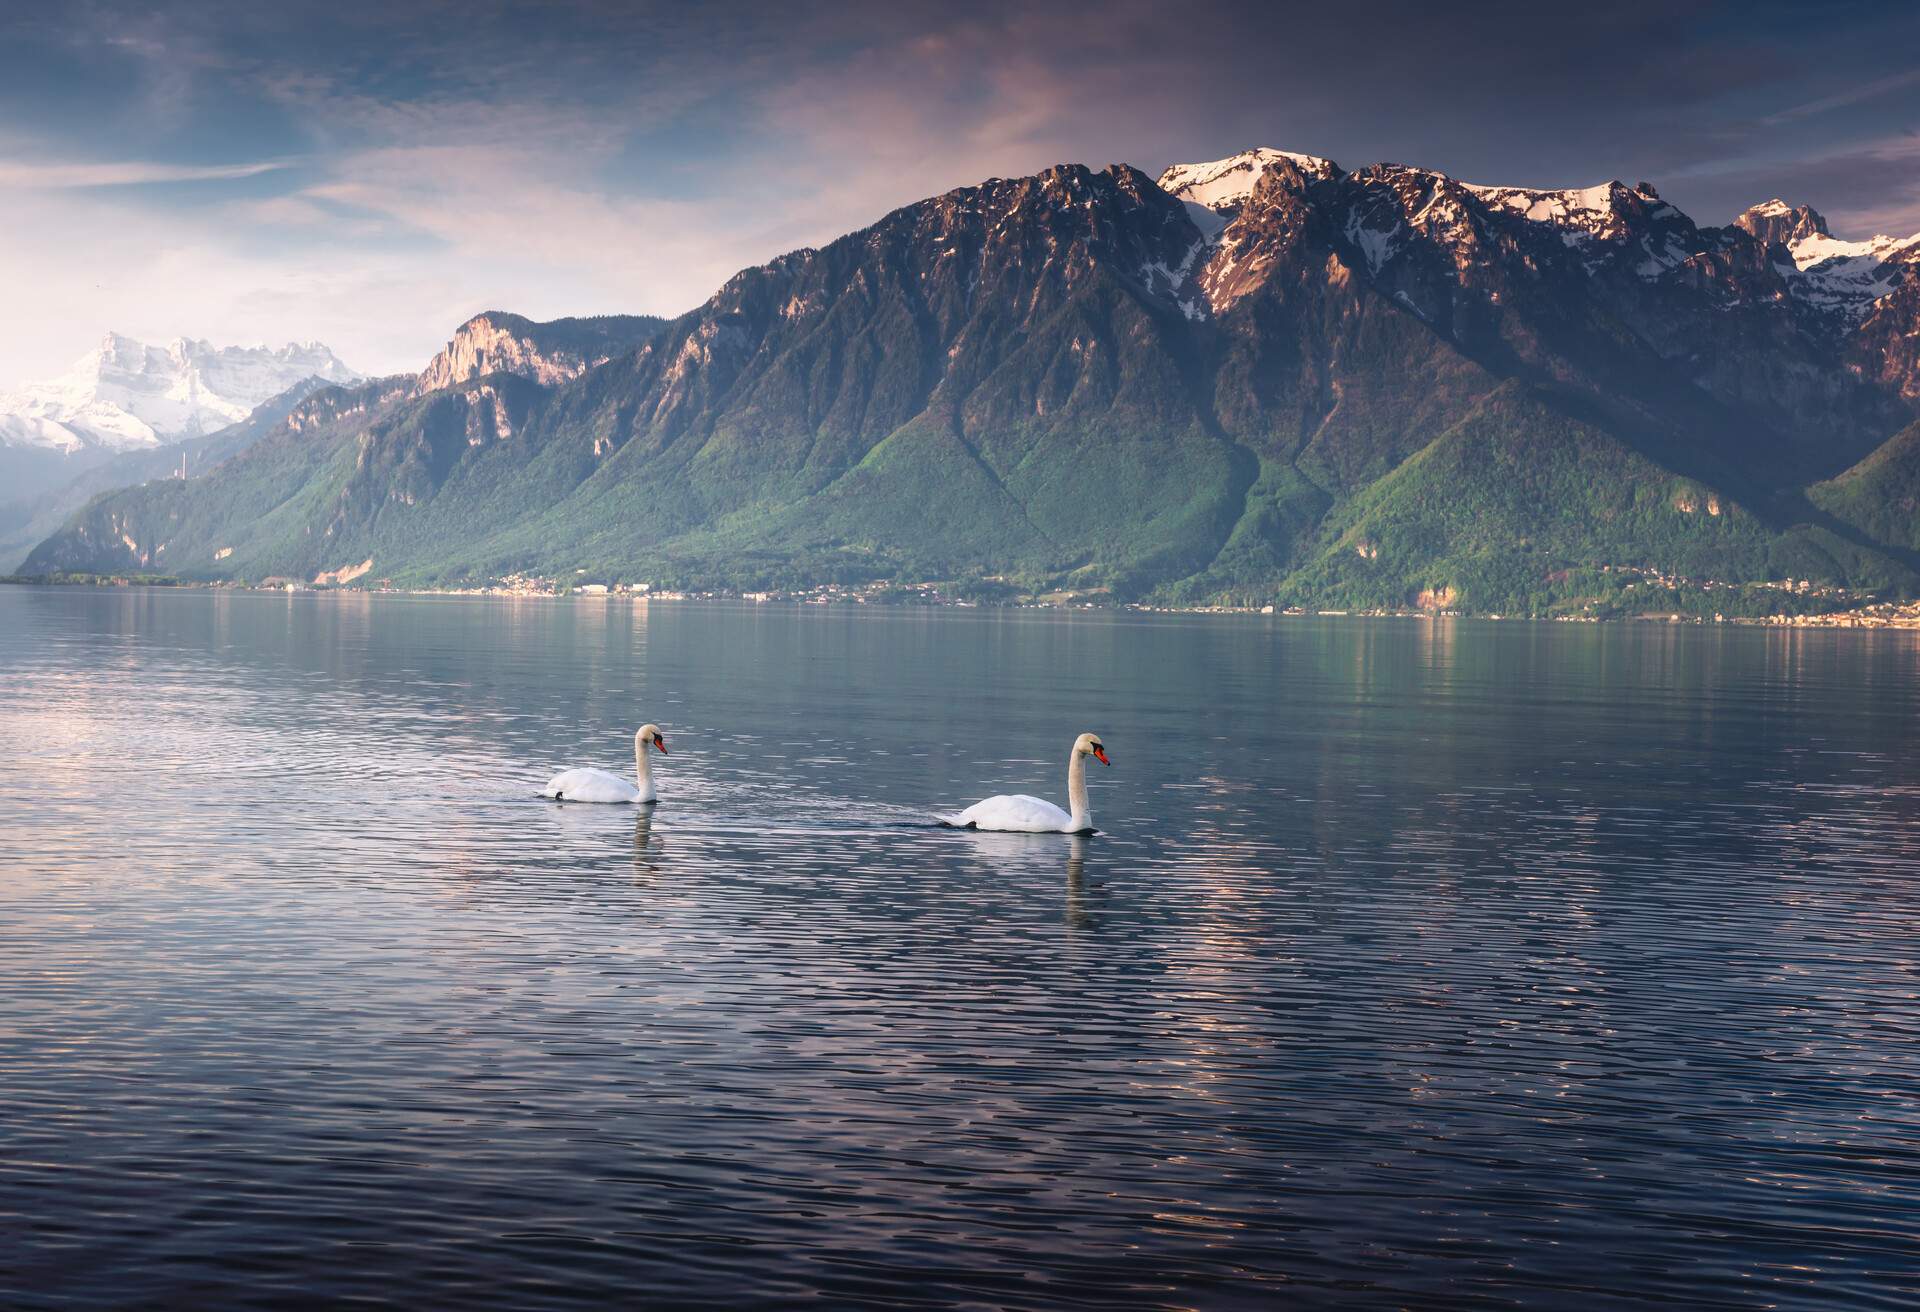 Nature Landscape Scenery View and Twin Swans in The Lake of Geneva Lake, Vevey, Switzerland